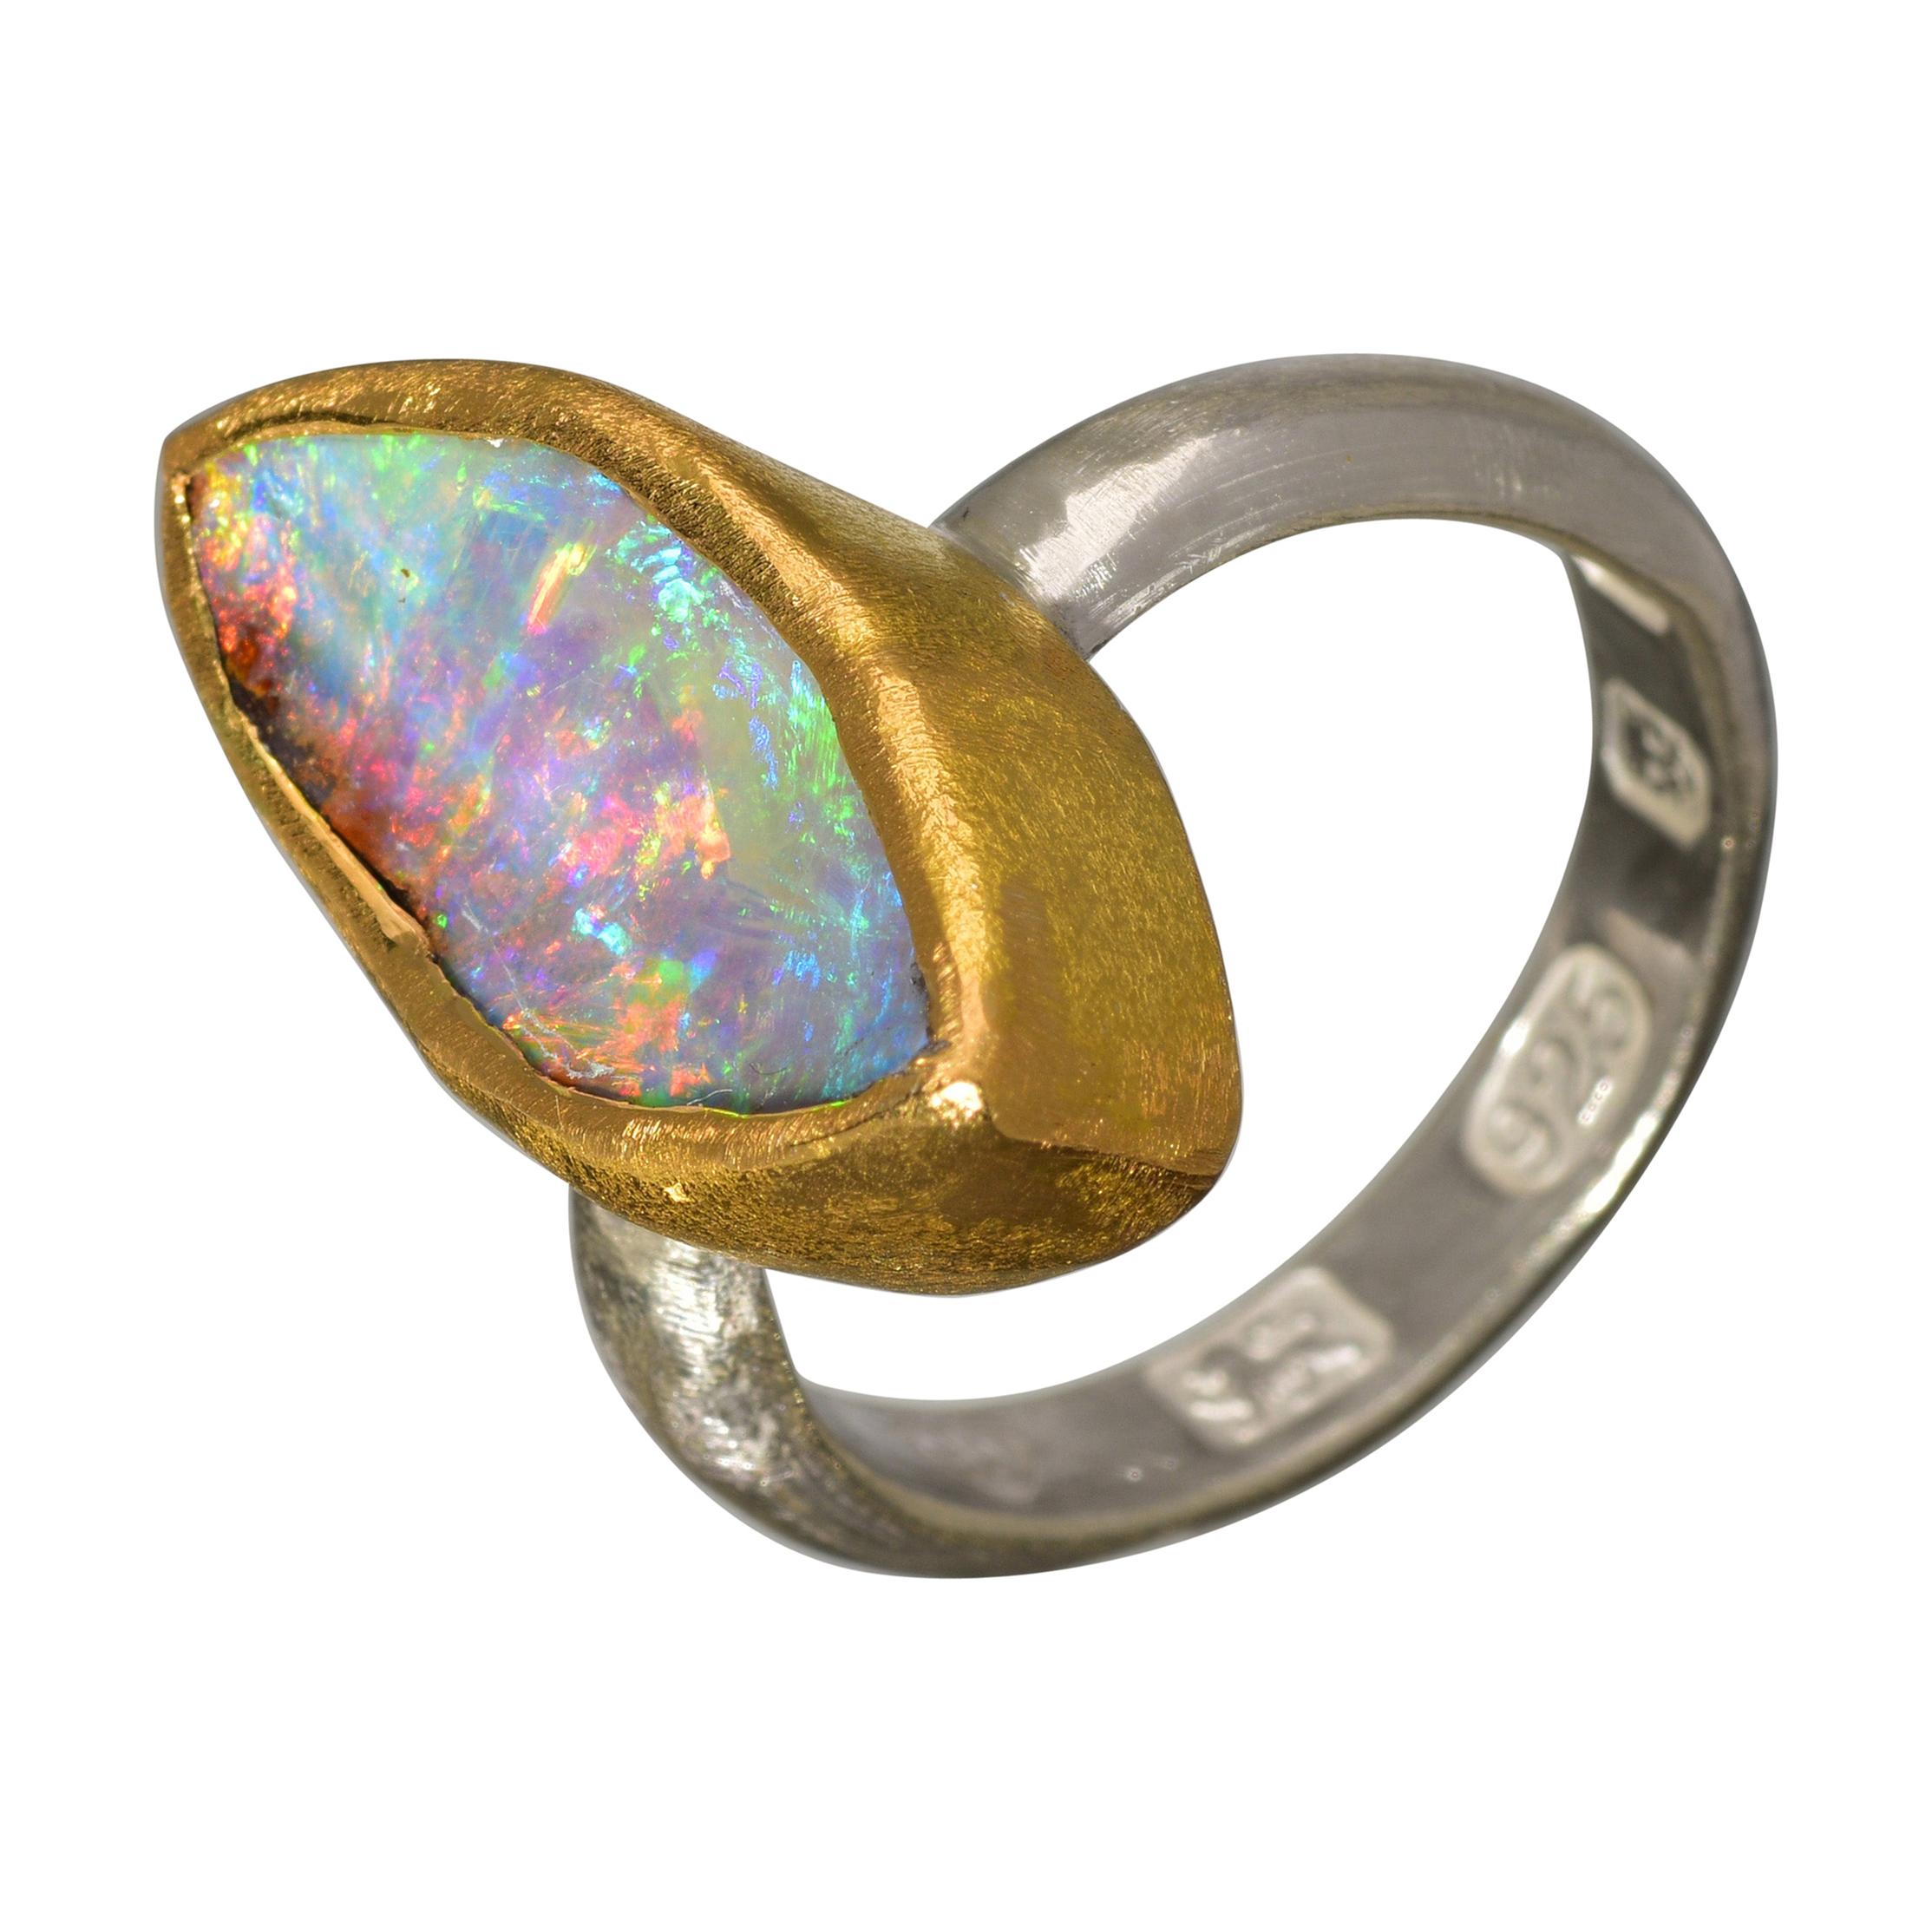 Solid Boulder Opal Ring with 22 Karat Gold and Silver